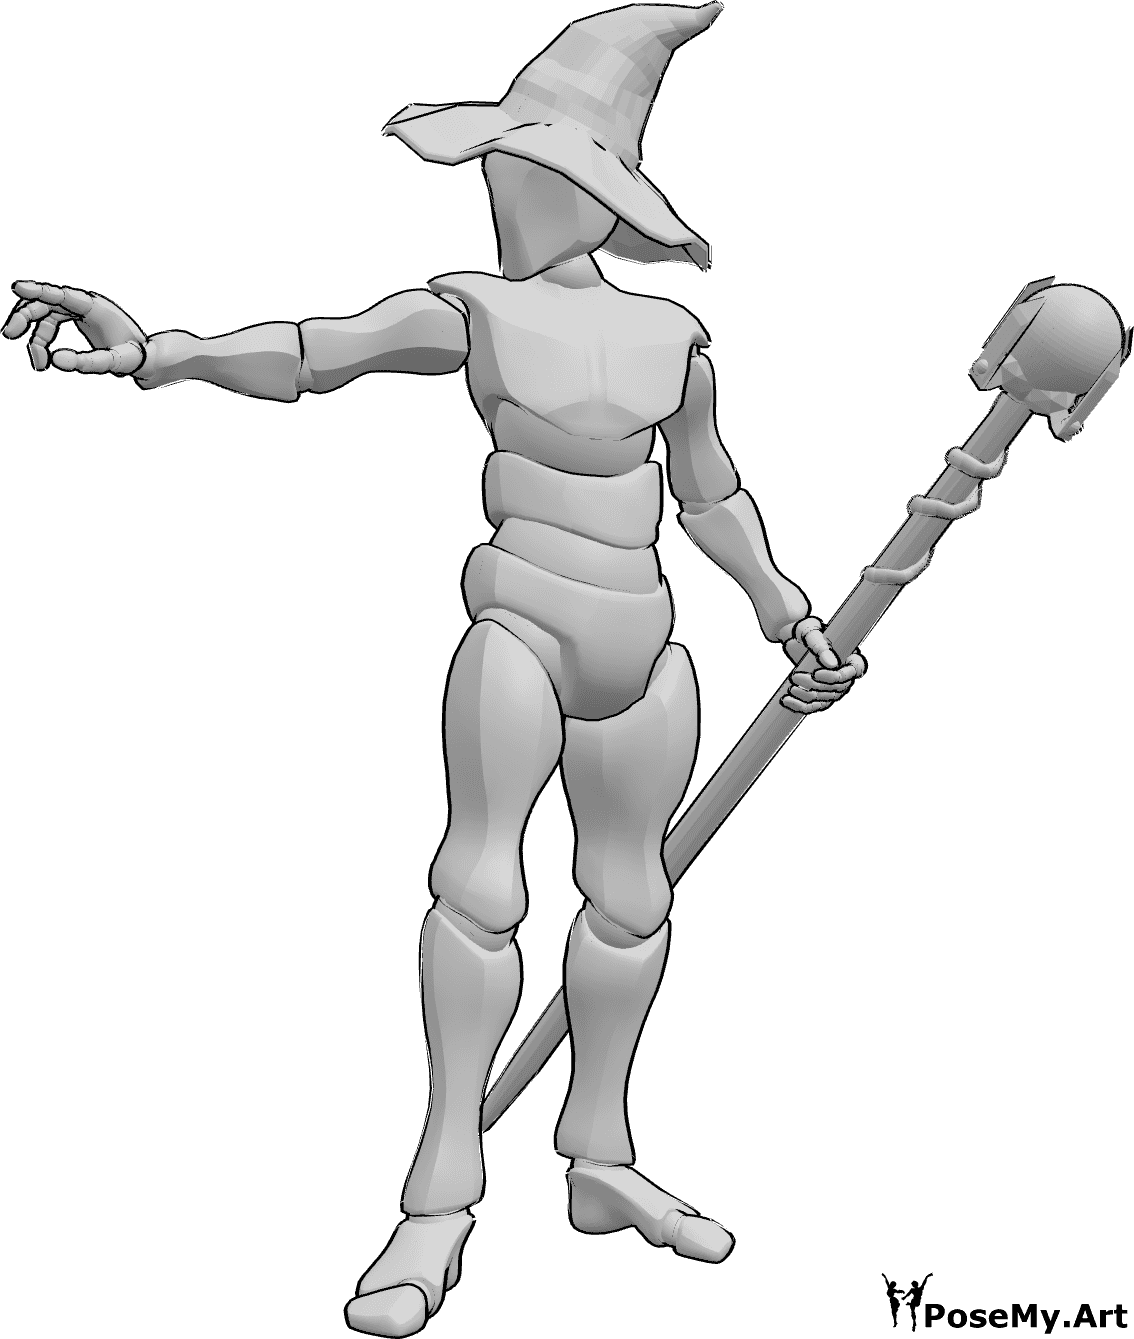 Pose Reference- Wizard spell casting pose - Male wizard is standing, holding a staff in his left hand and casting a spell with his right hand